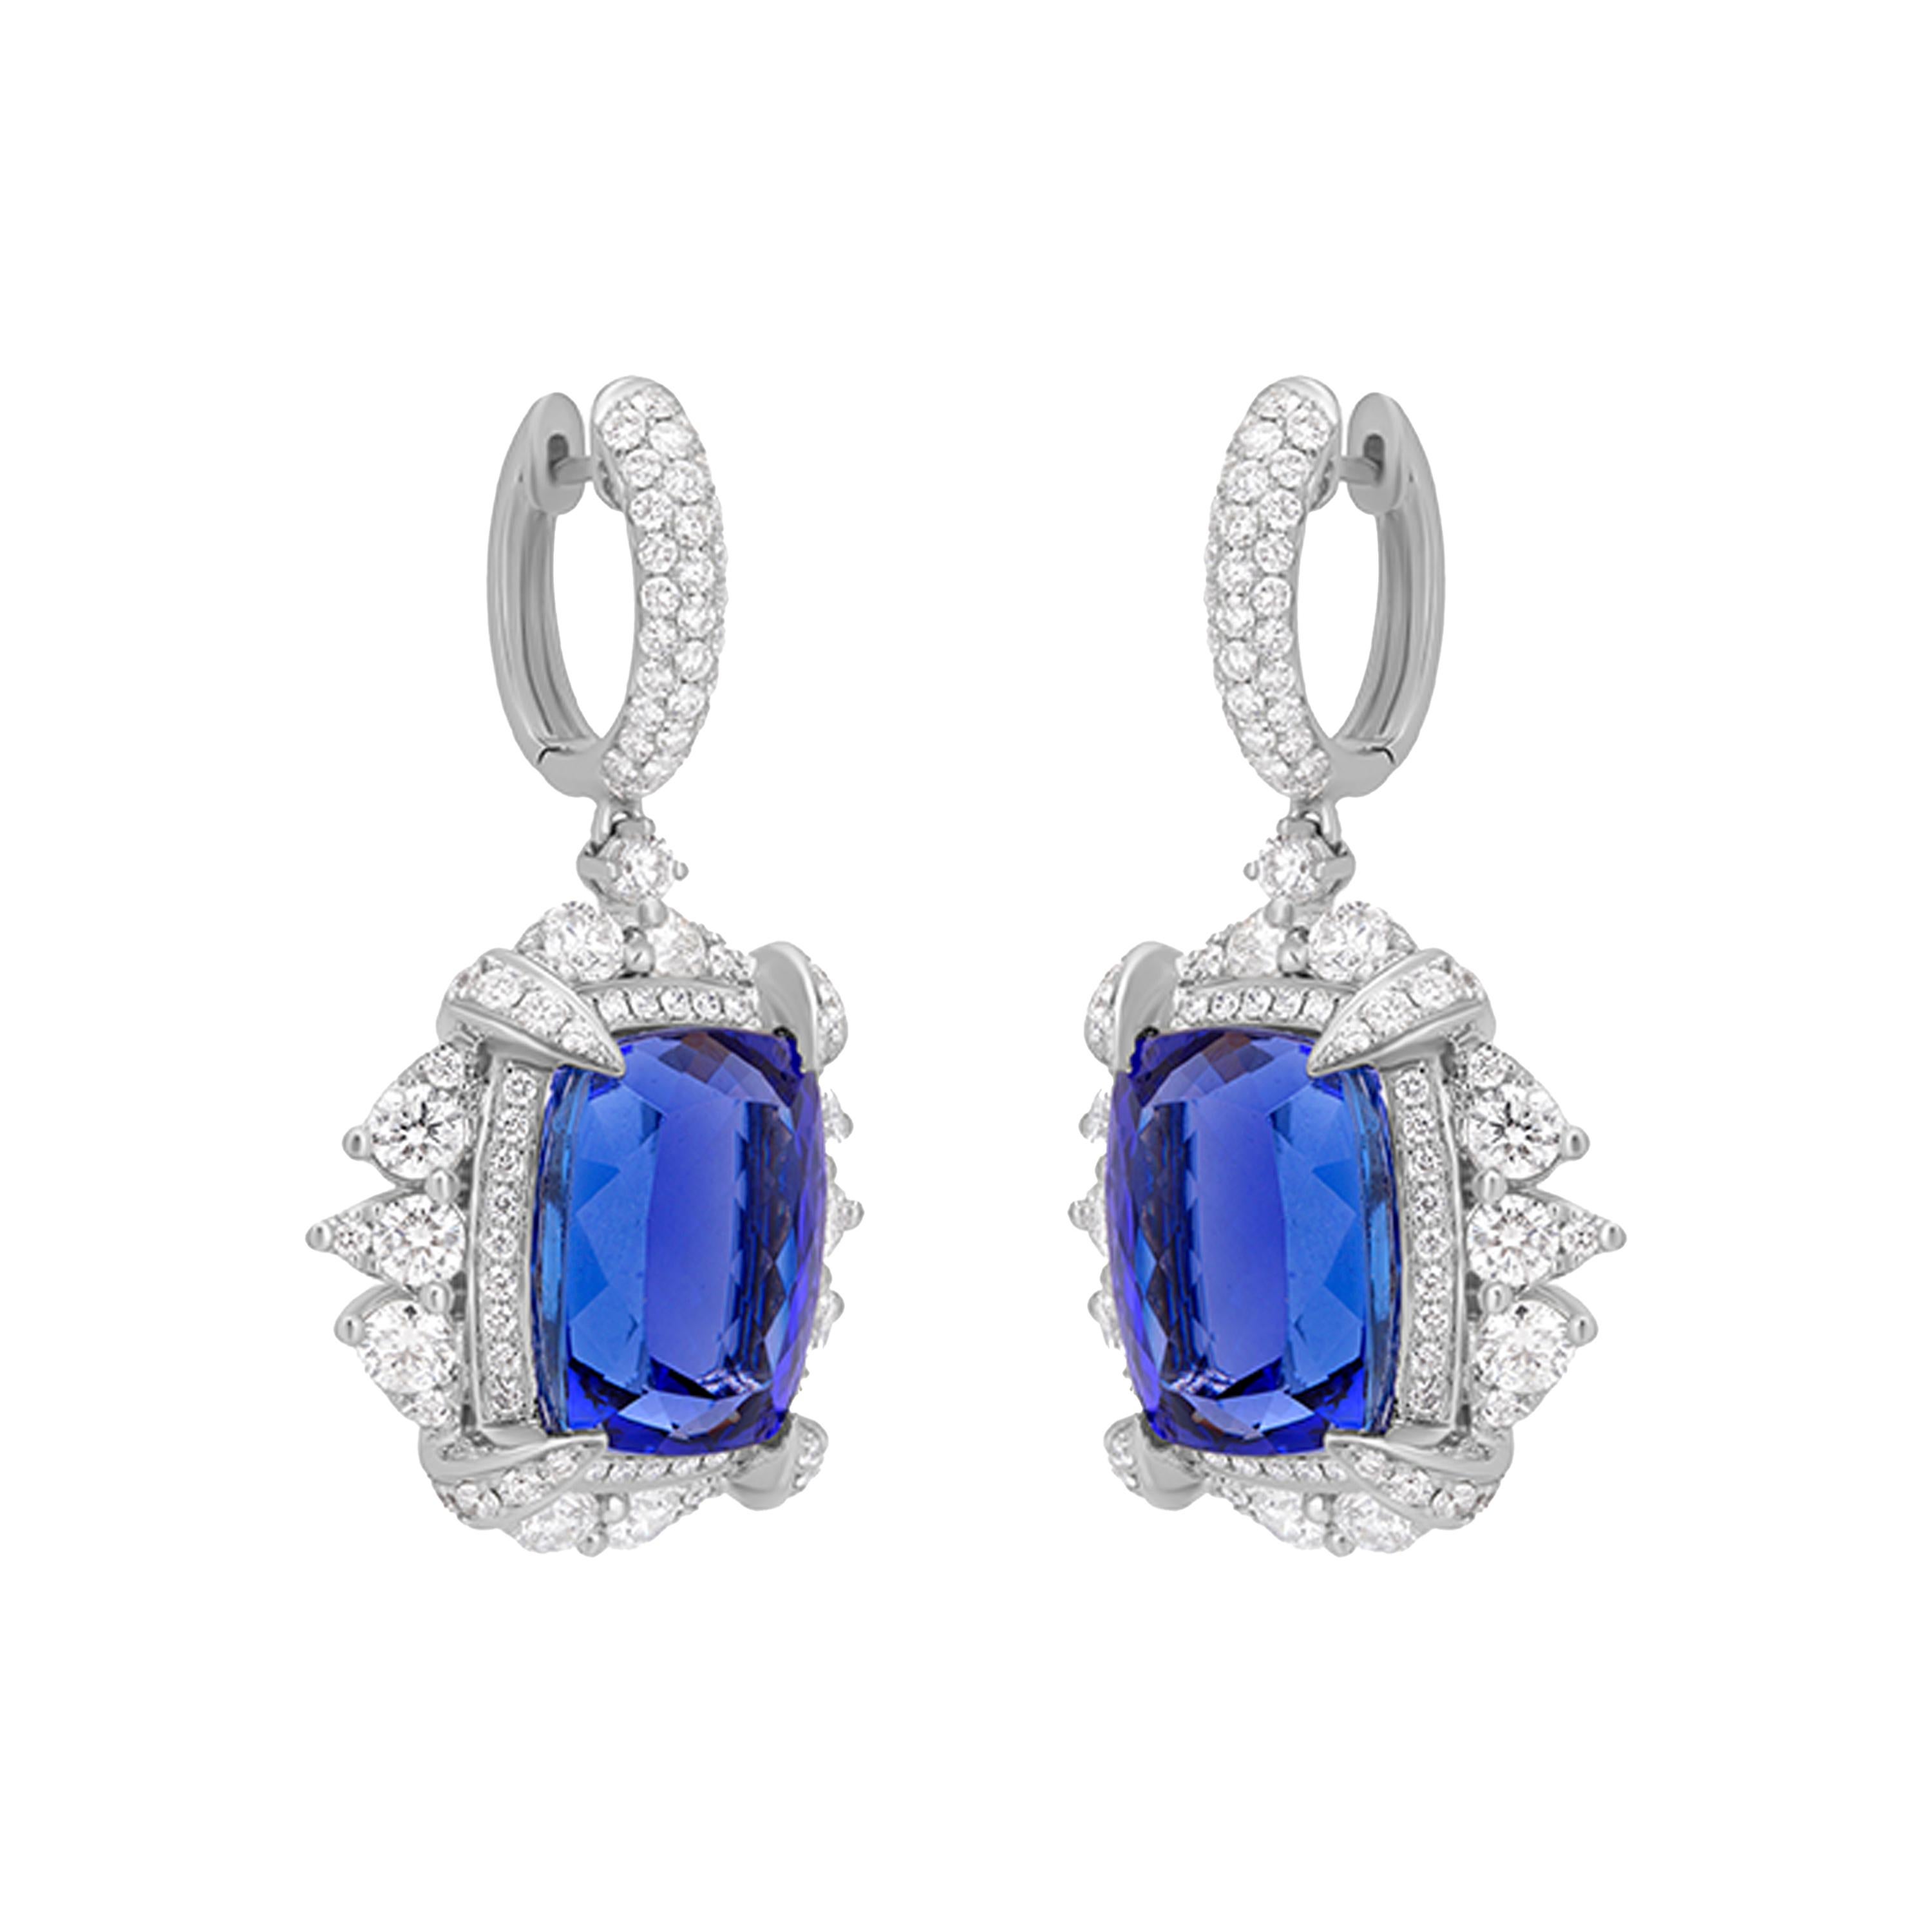 Contemporary Nigaam 30.93 Ct. T.W. Tanzanite and Diamond Dangle Earrings in 18K White Gold